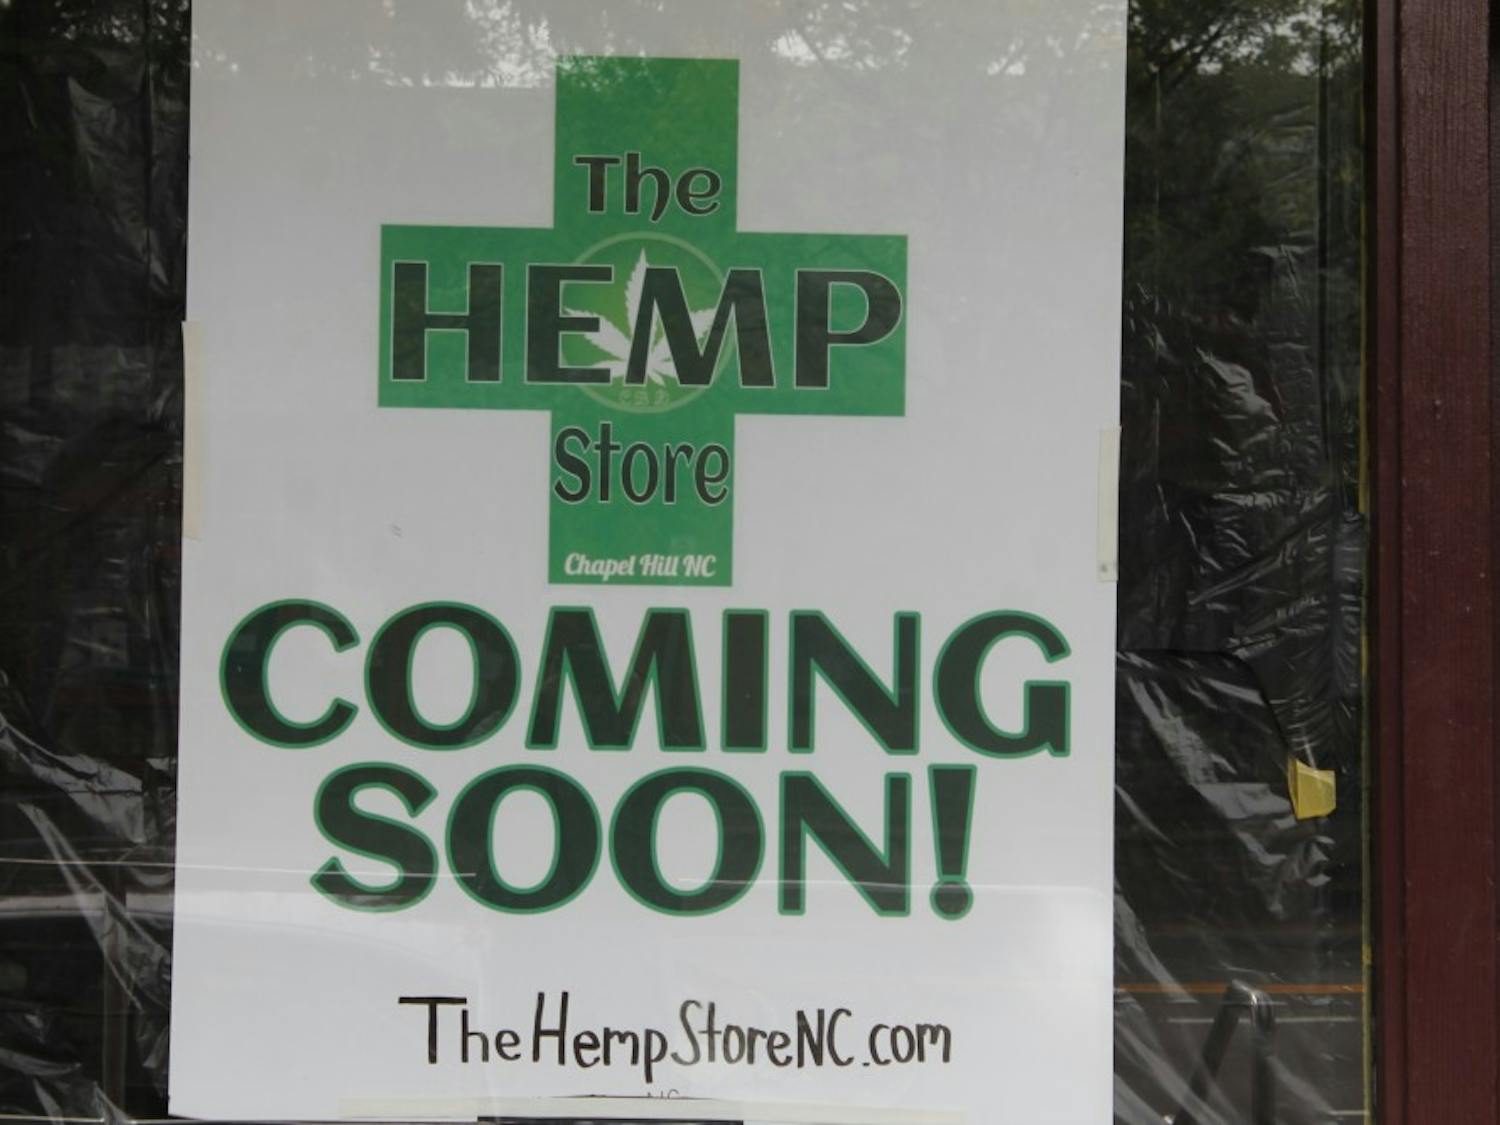 The Hemp Store on Thursday October 25, 2018 is opening soon on Franklin Street.